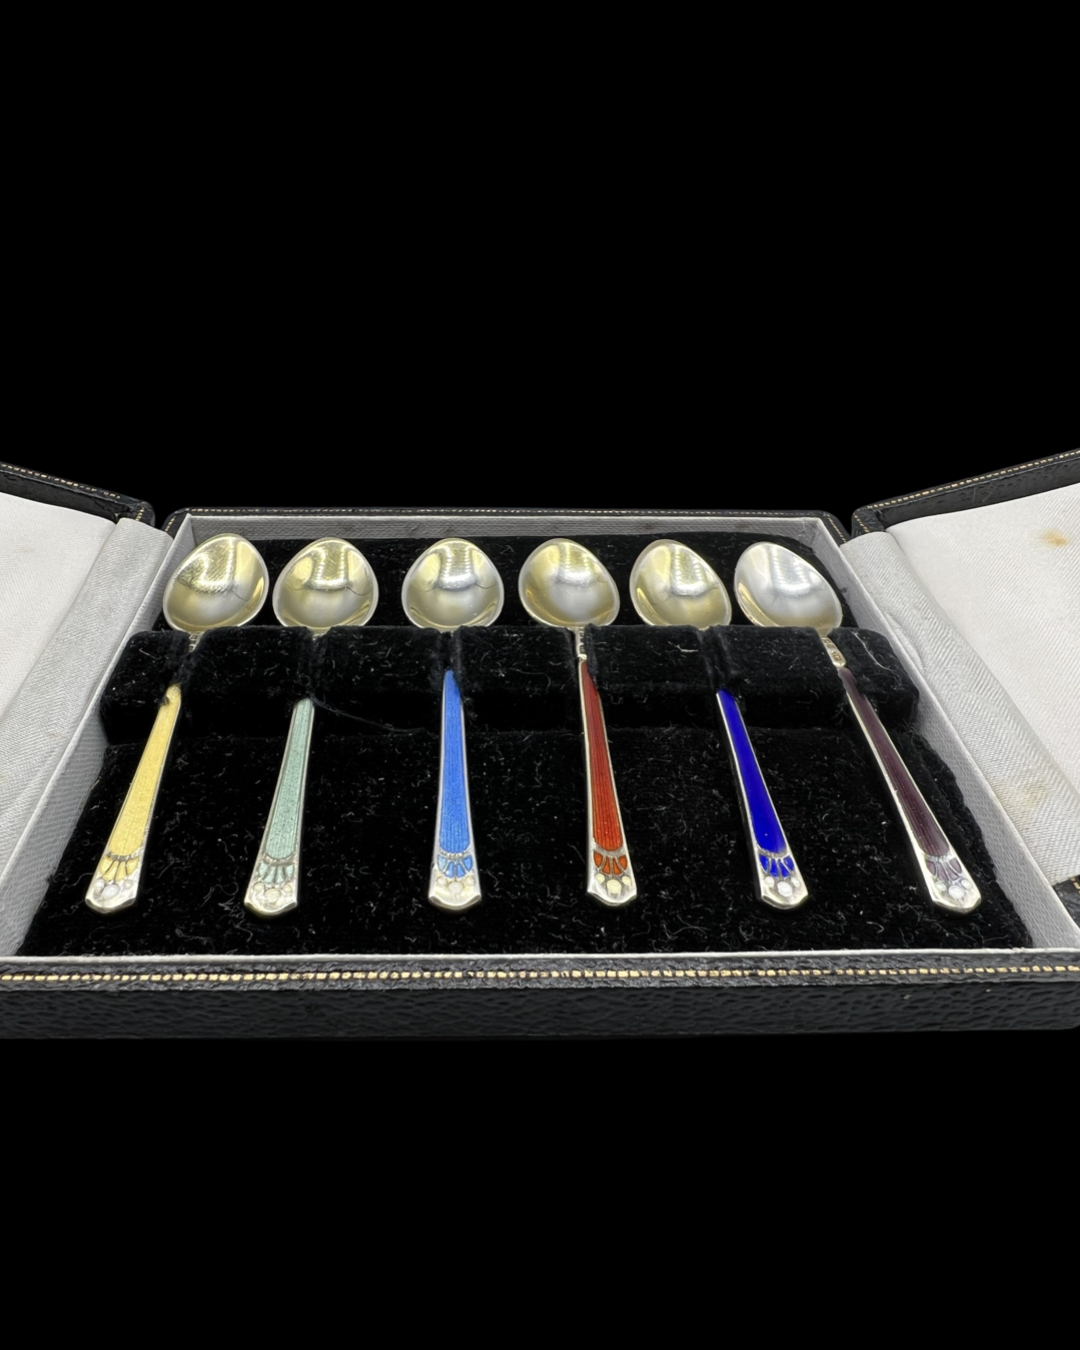 Vintage Harrods 1955 Hallmarked Sterling Silver and Enamel Spoon Set, in good condition with